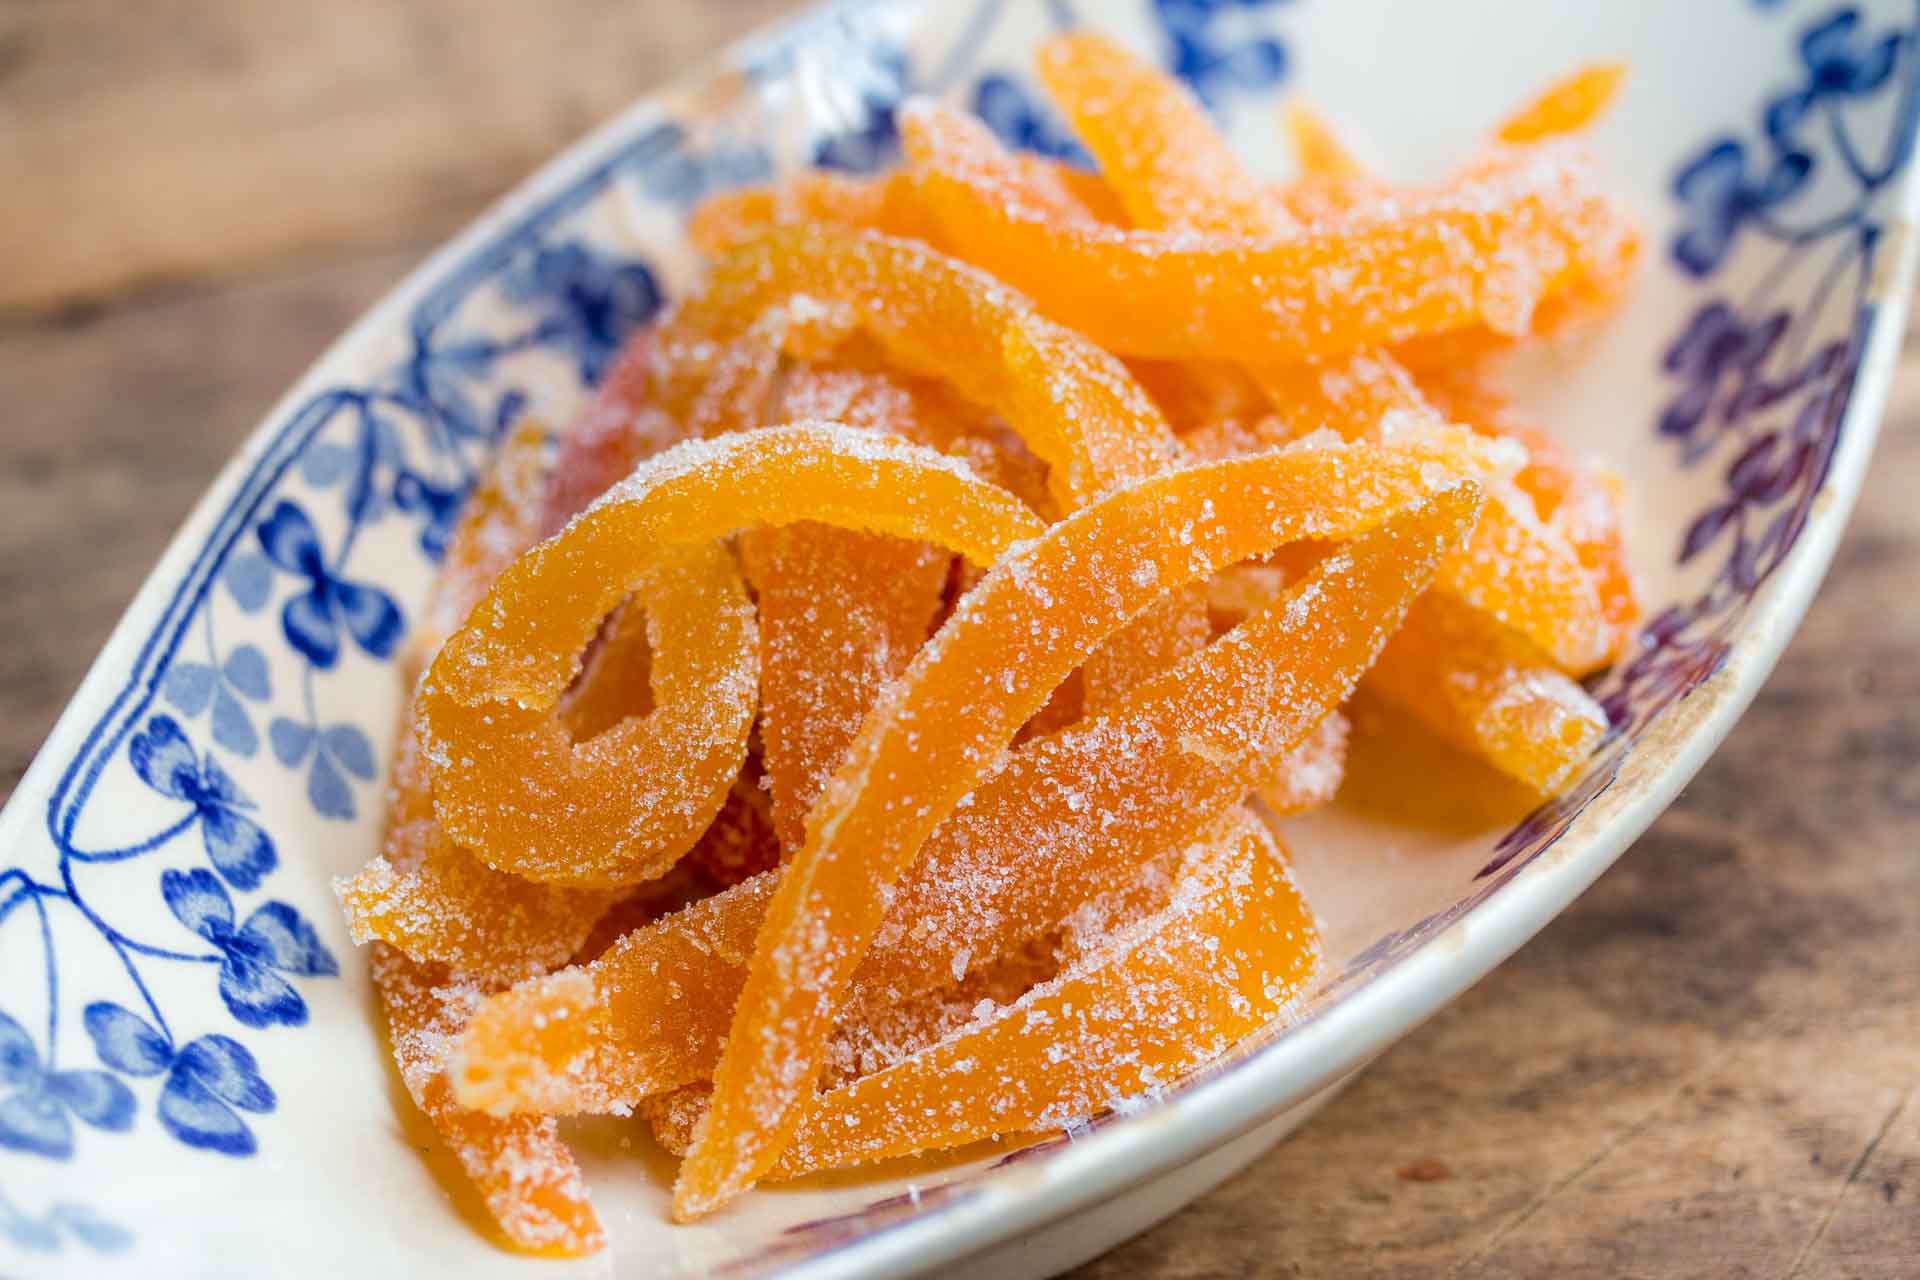 candied orange peels recipe – use real butter